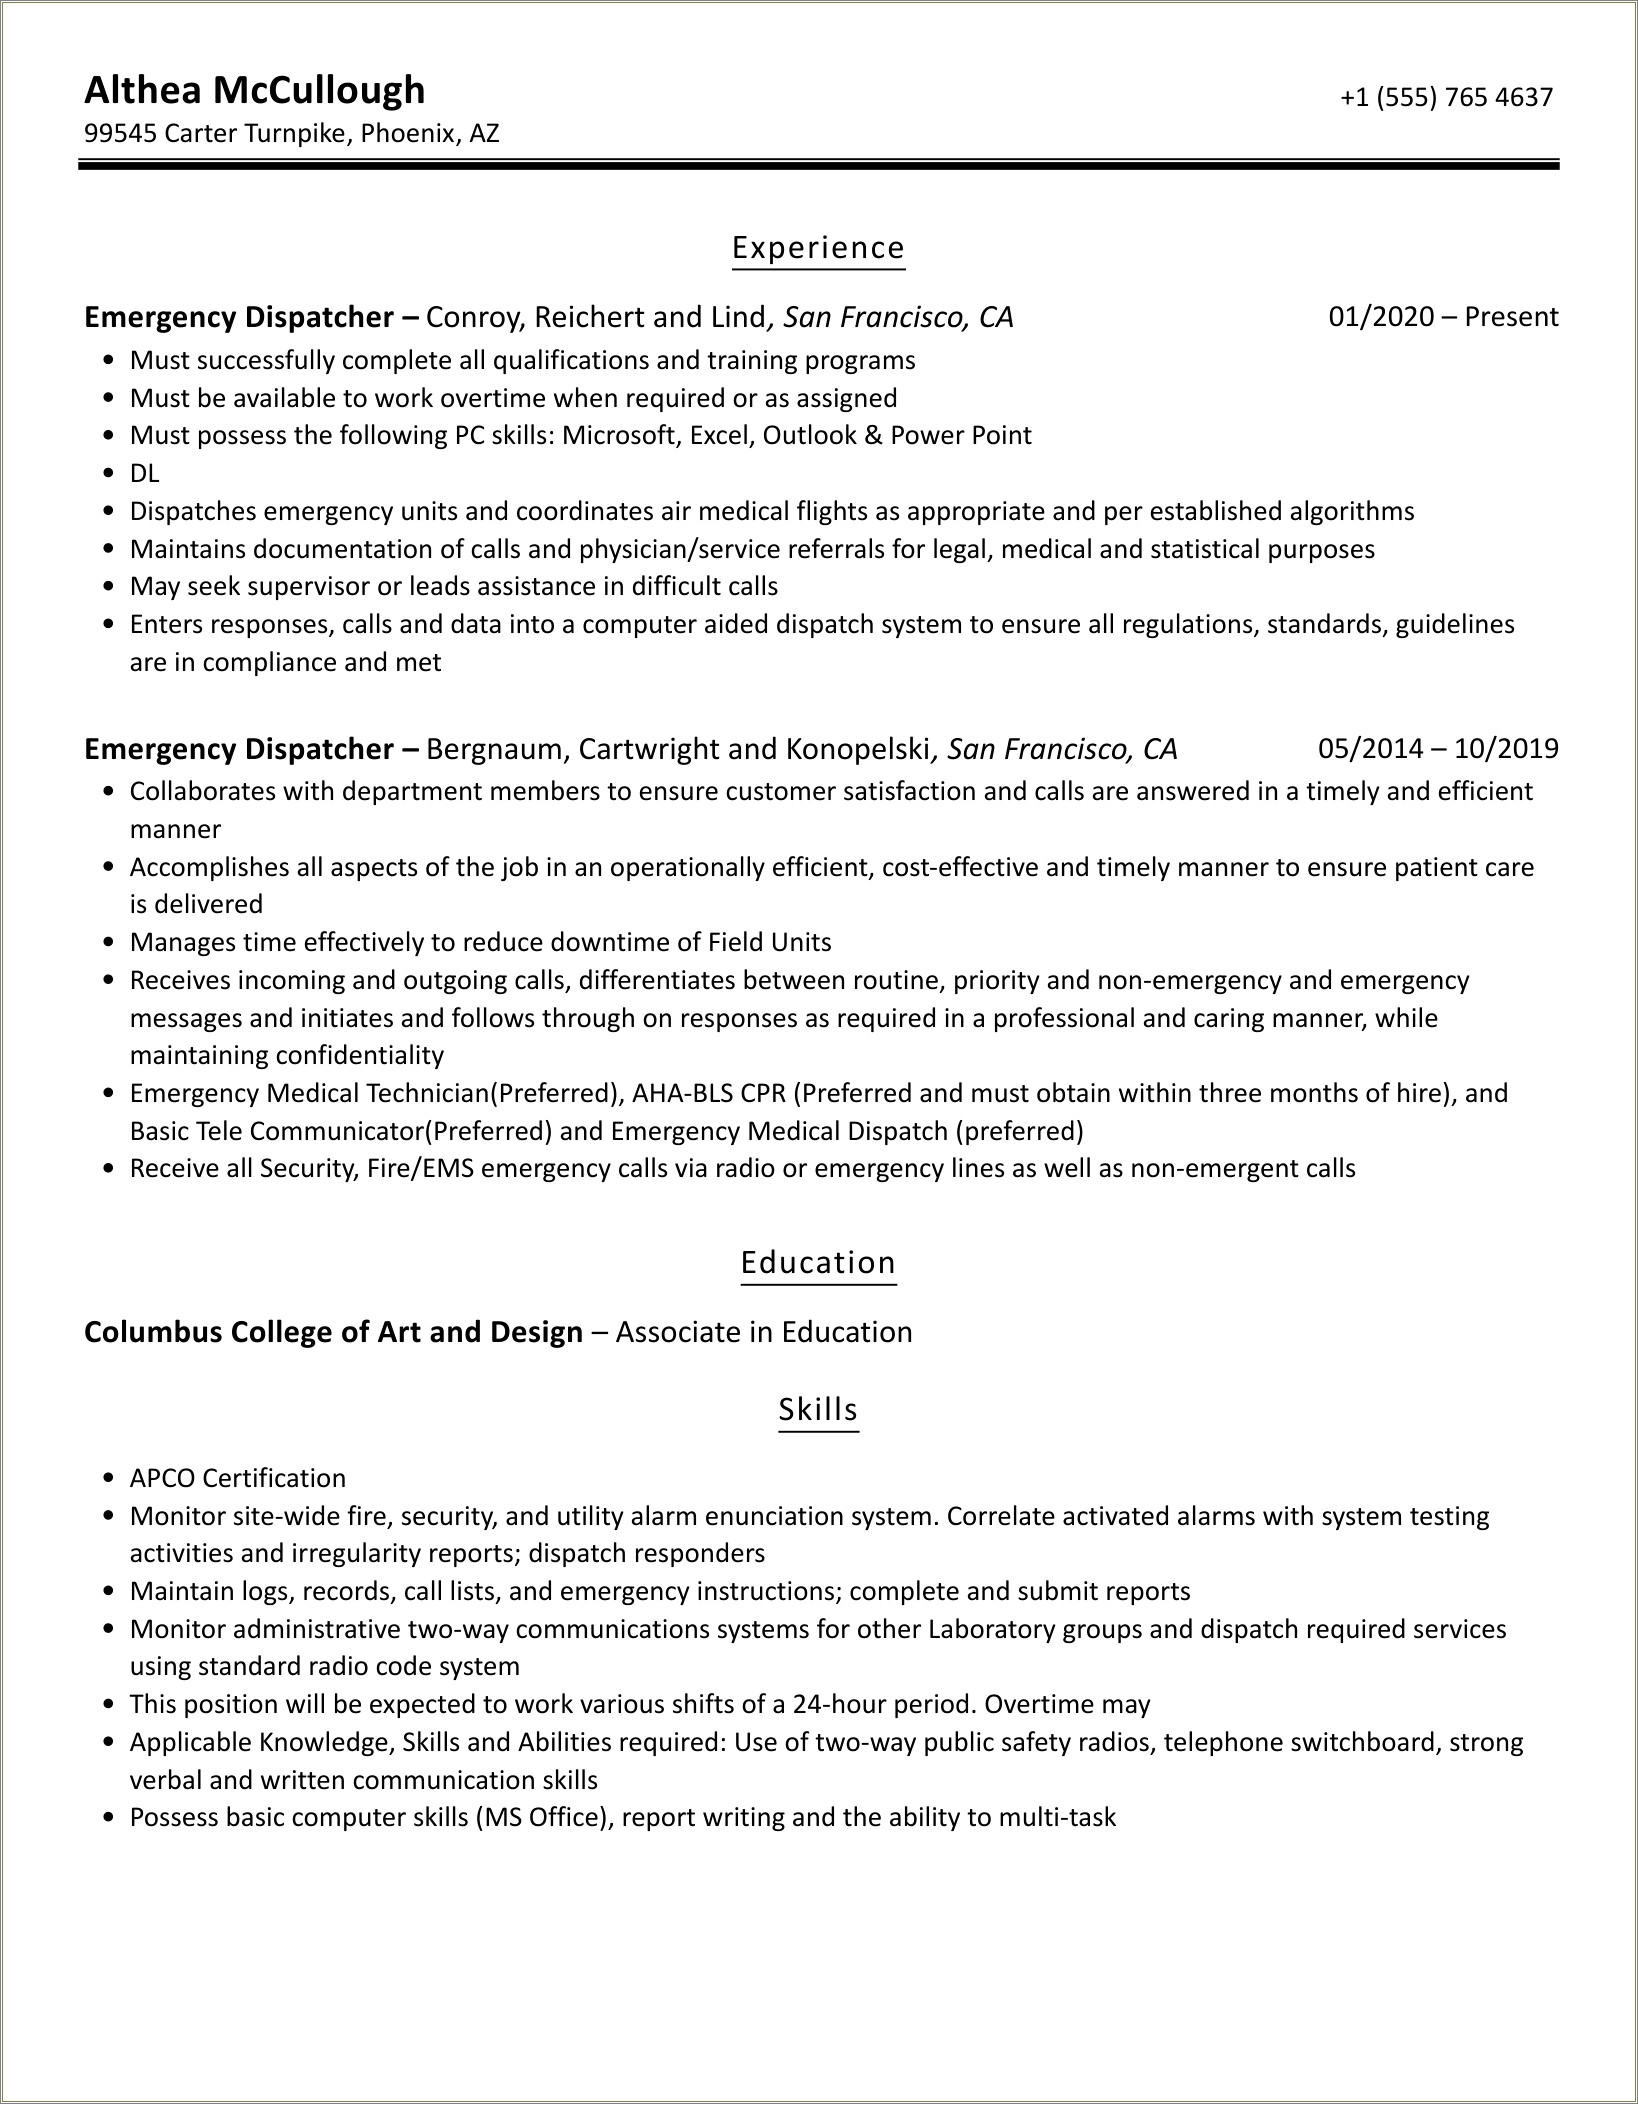 Exceptional Resume Objective Examples 911 Dispatcher